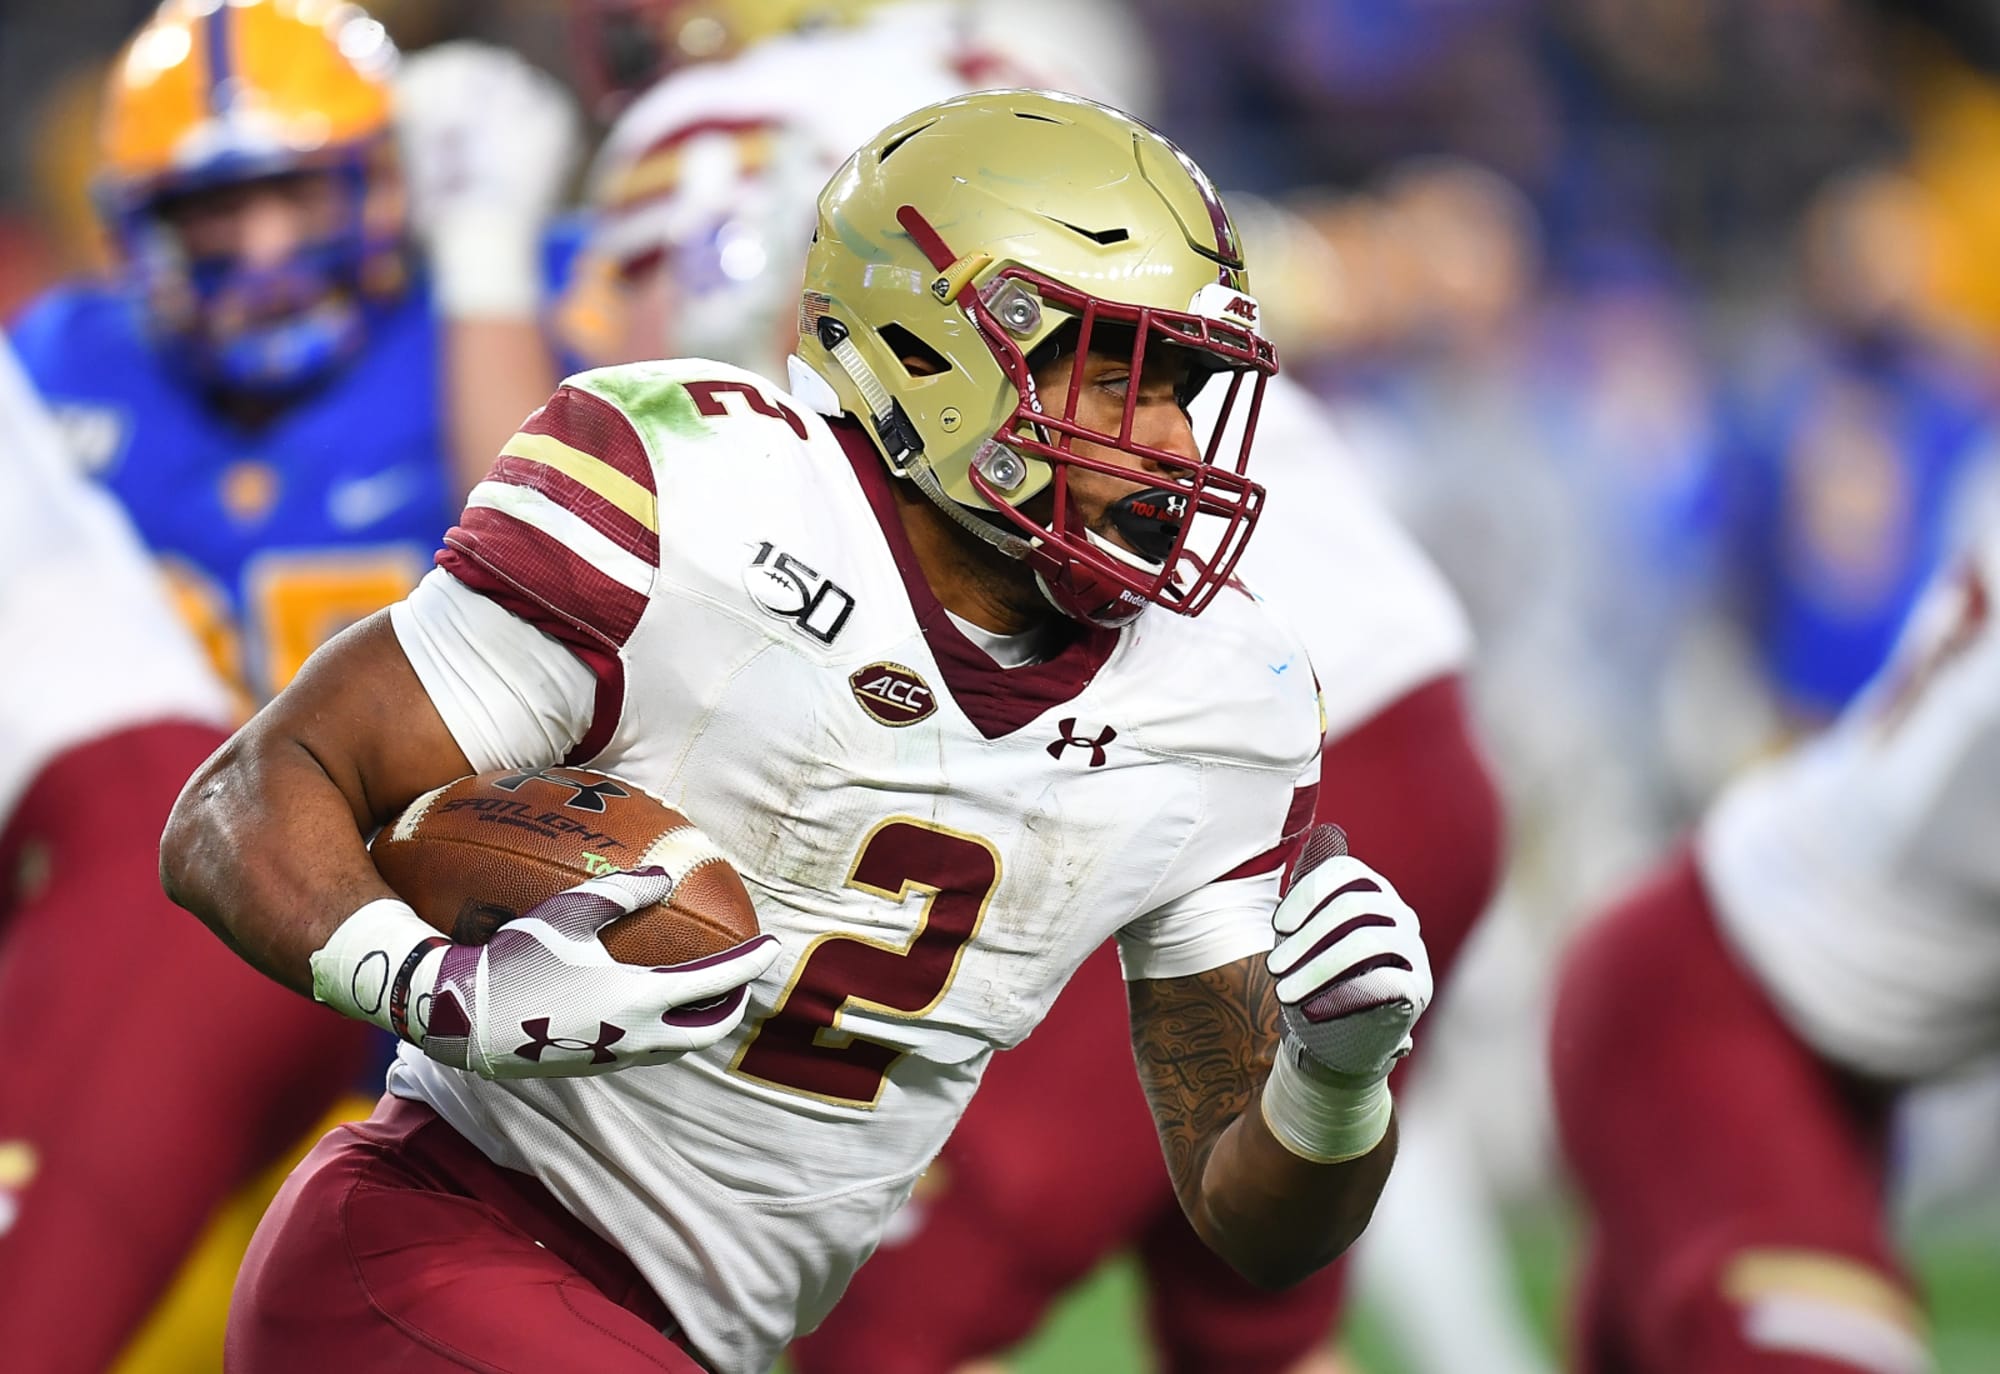 2020 NFL Scouting Combine running back results: RB AJ Dillon shines